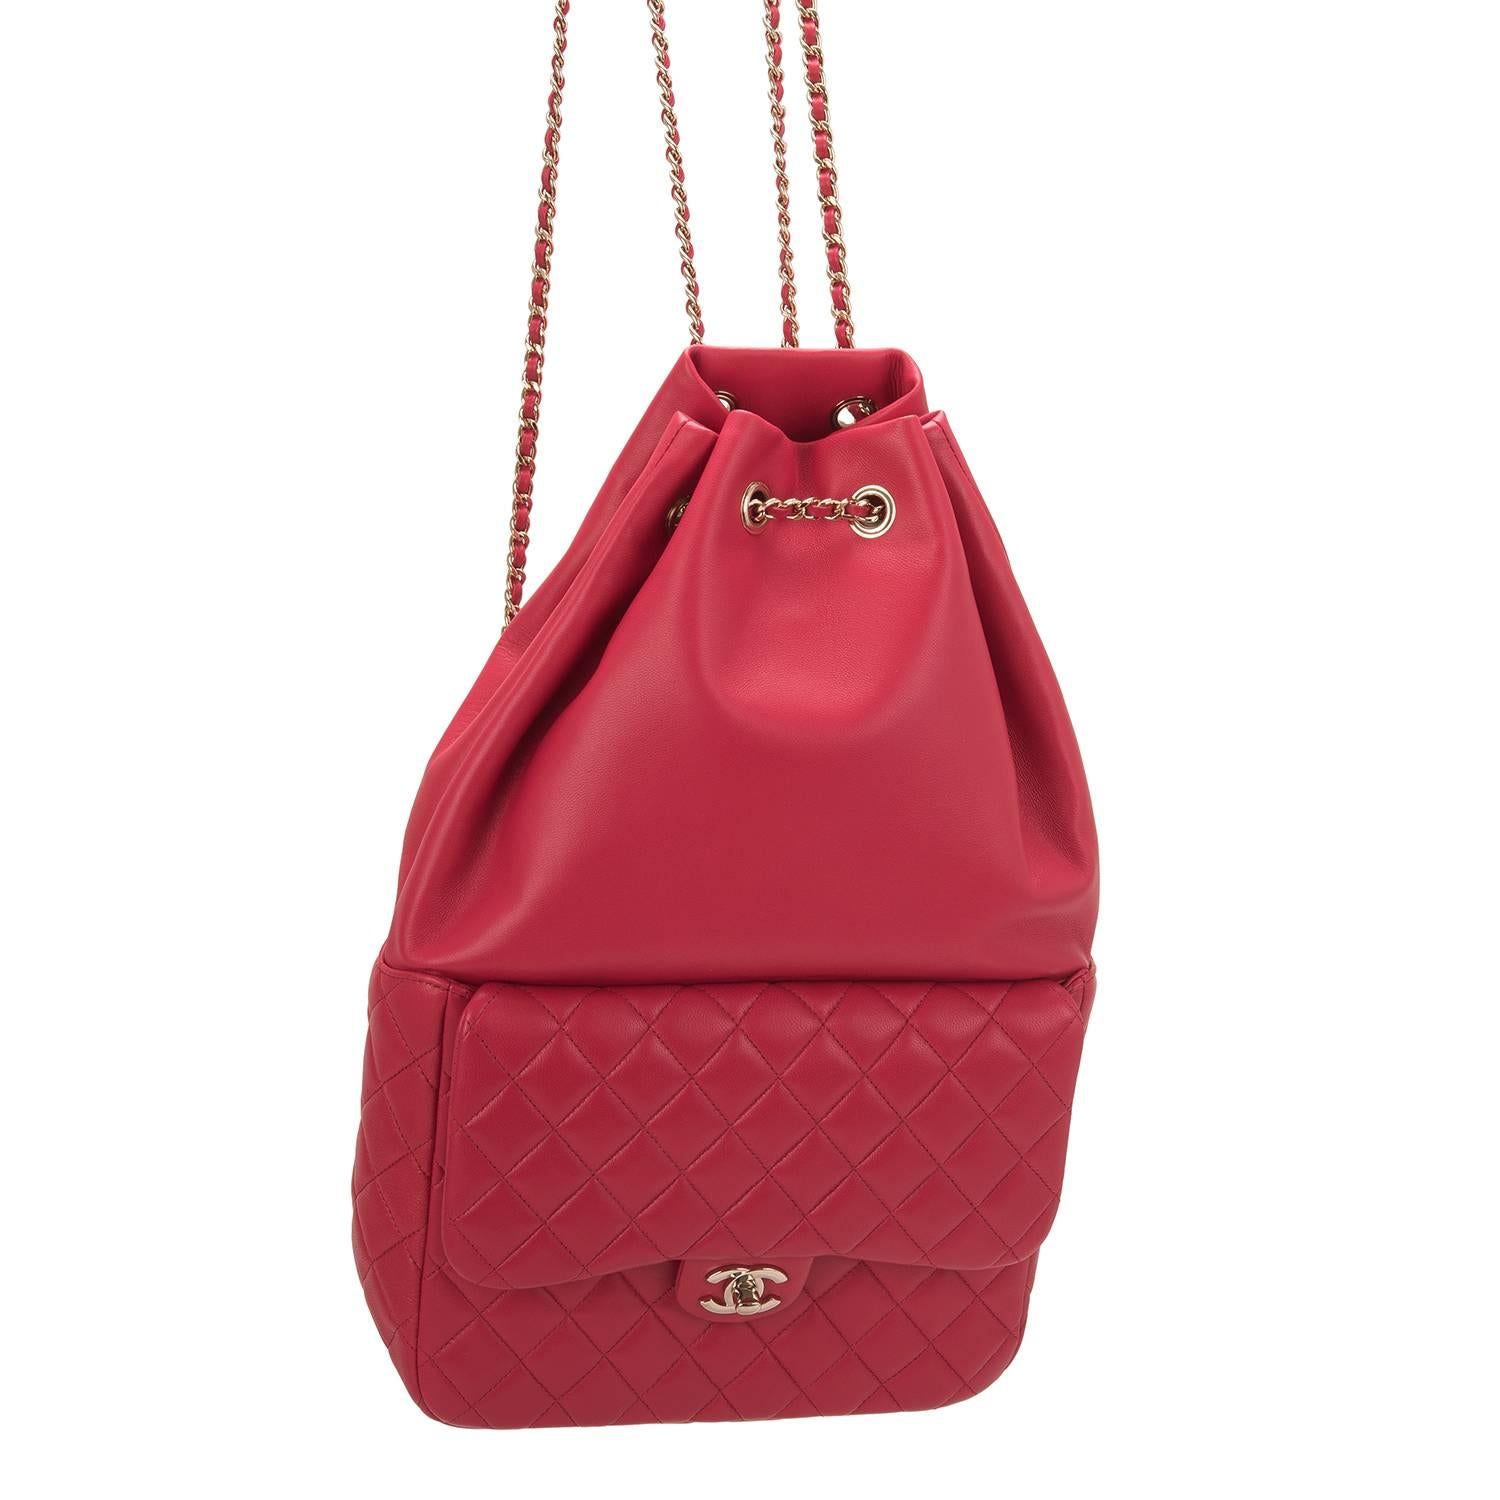 Chanel Red Lambskin Large Backpack For Sale 1